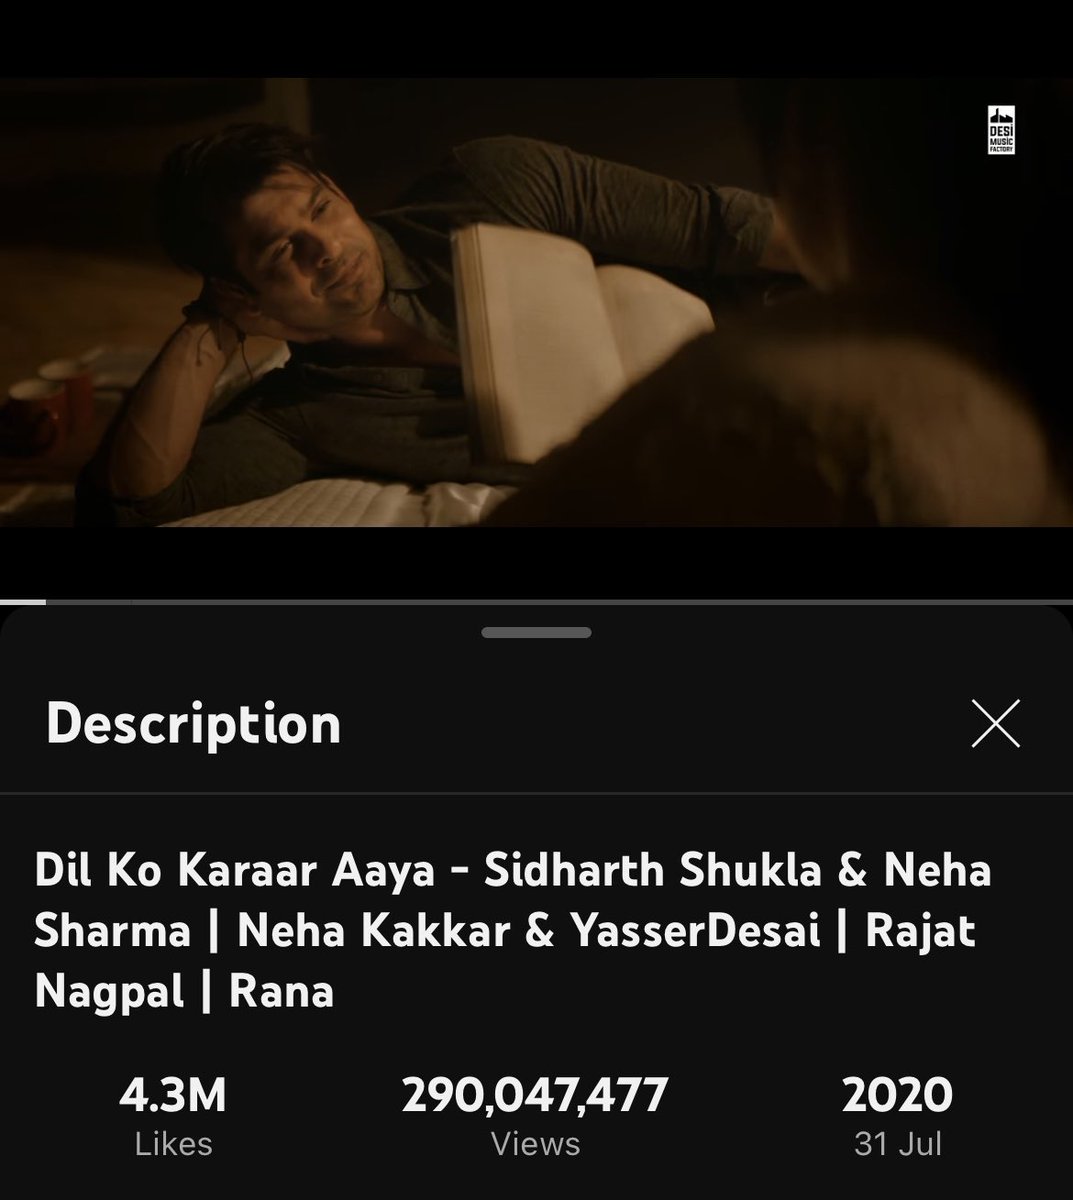 #DilKoKaraarAaya completed 290M views. 10M more to go.
I guess it might complete 300M in 1st or 2nd week of Aug 
#SidharthShukla #SidHearts